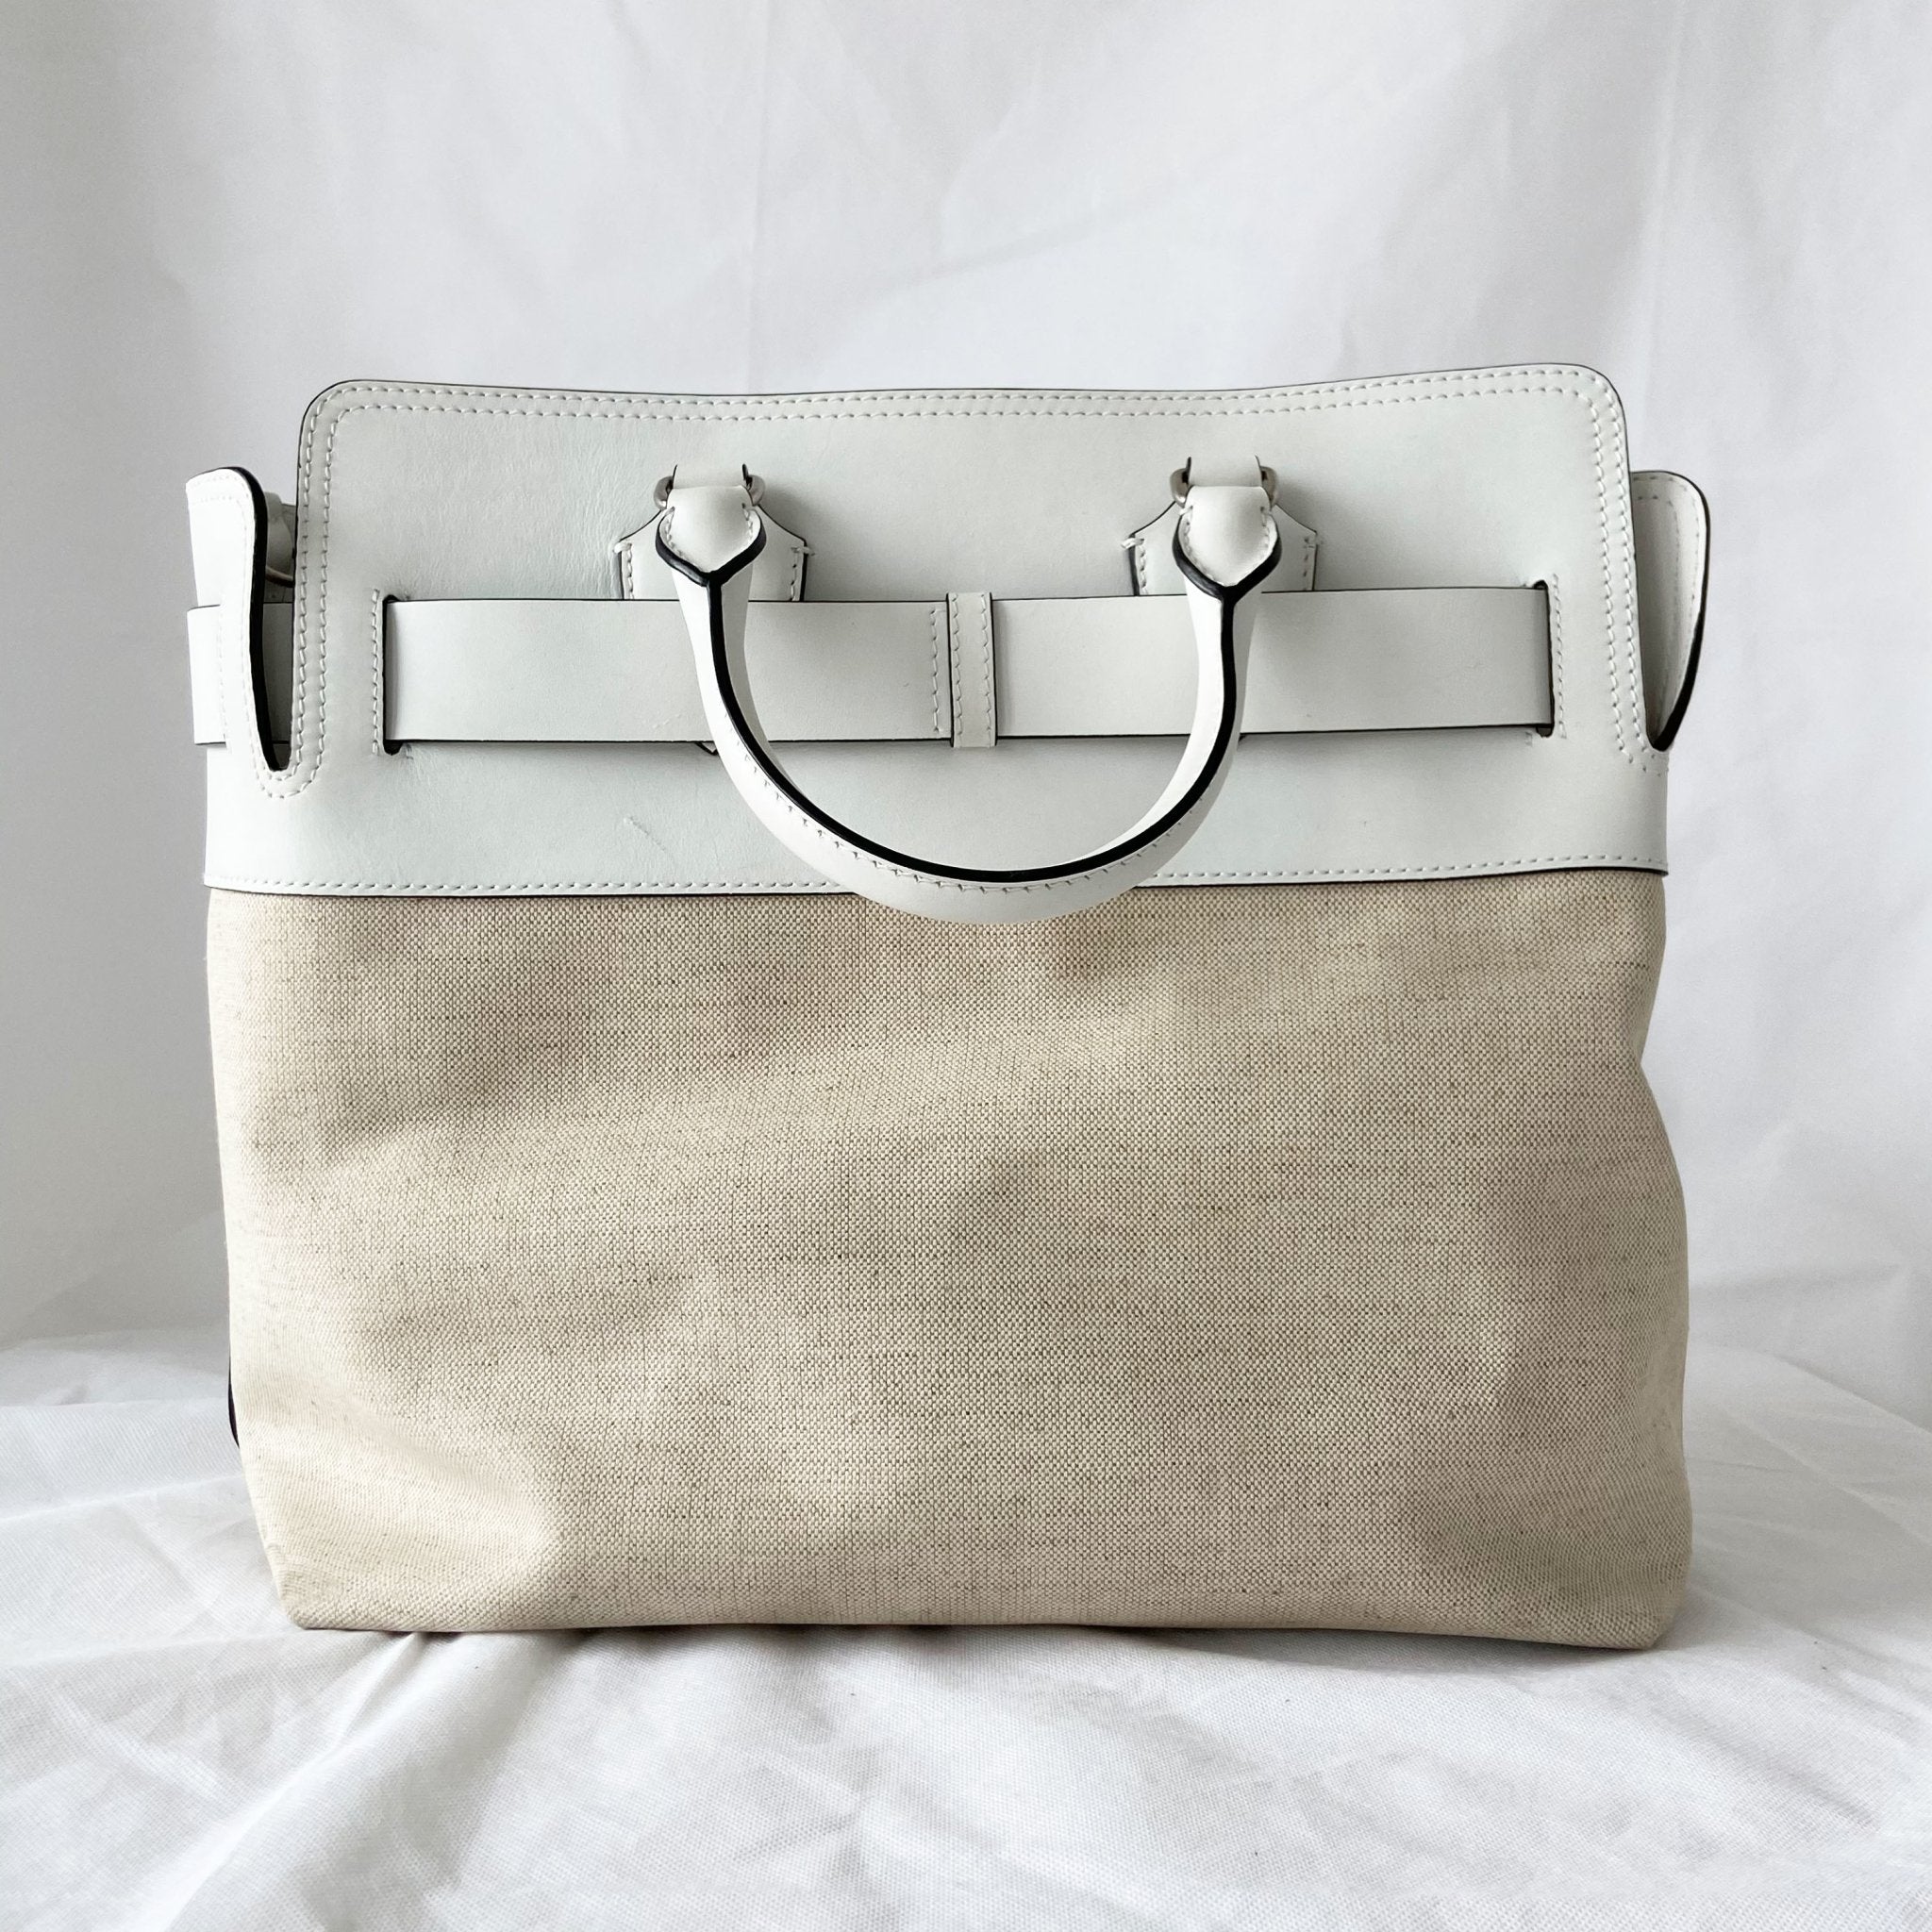 Burberry Large Leather Belt Bag in Grey, Women's